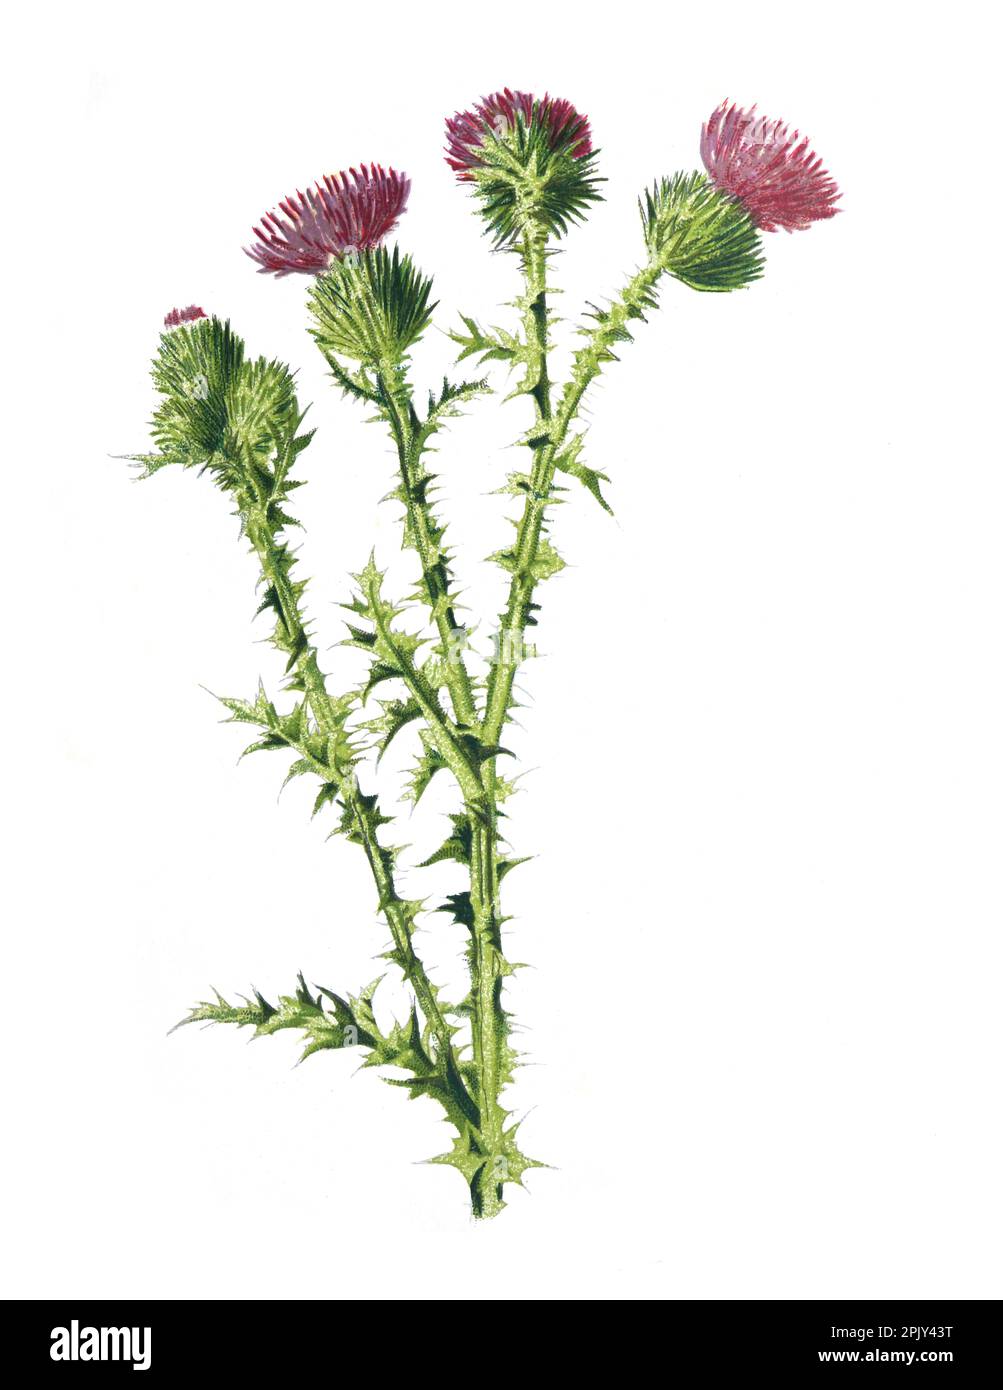 Field thistle or Carduus crispus family of the Asteraceae flower. Vintage hand drawn field flowers illustration. Thistle illustration. biodiversity. Stock Photo